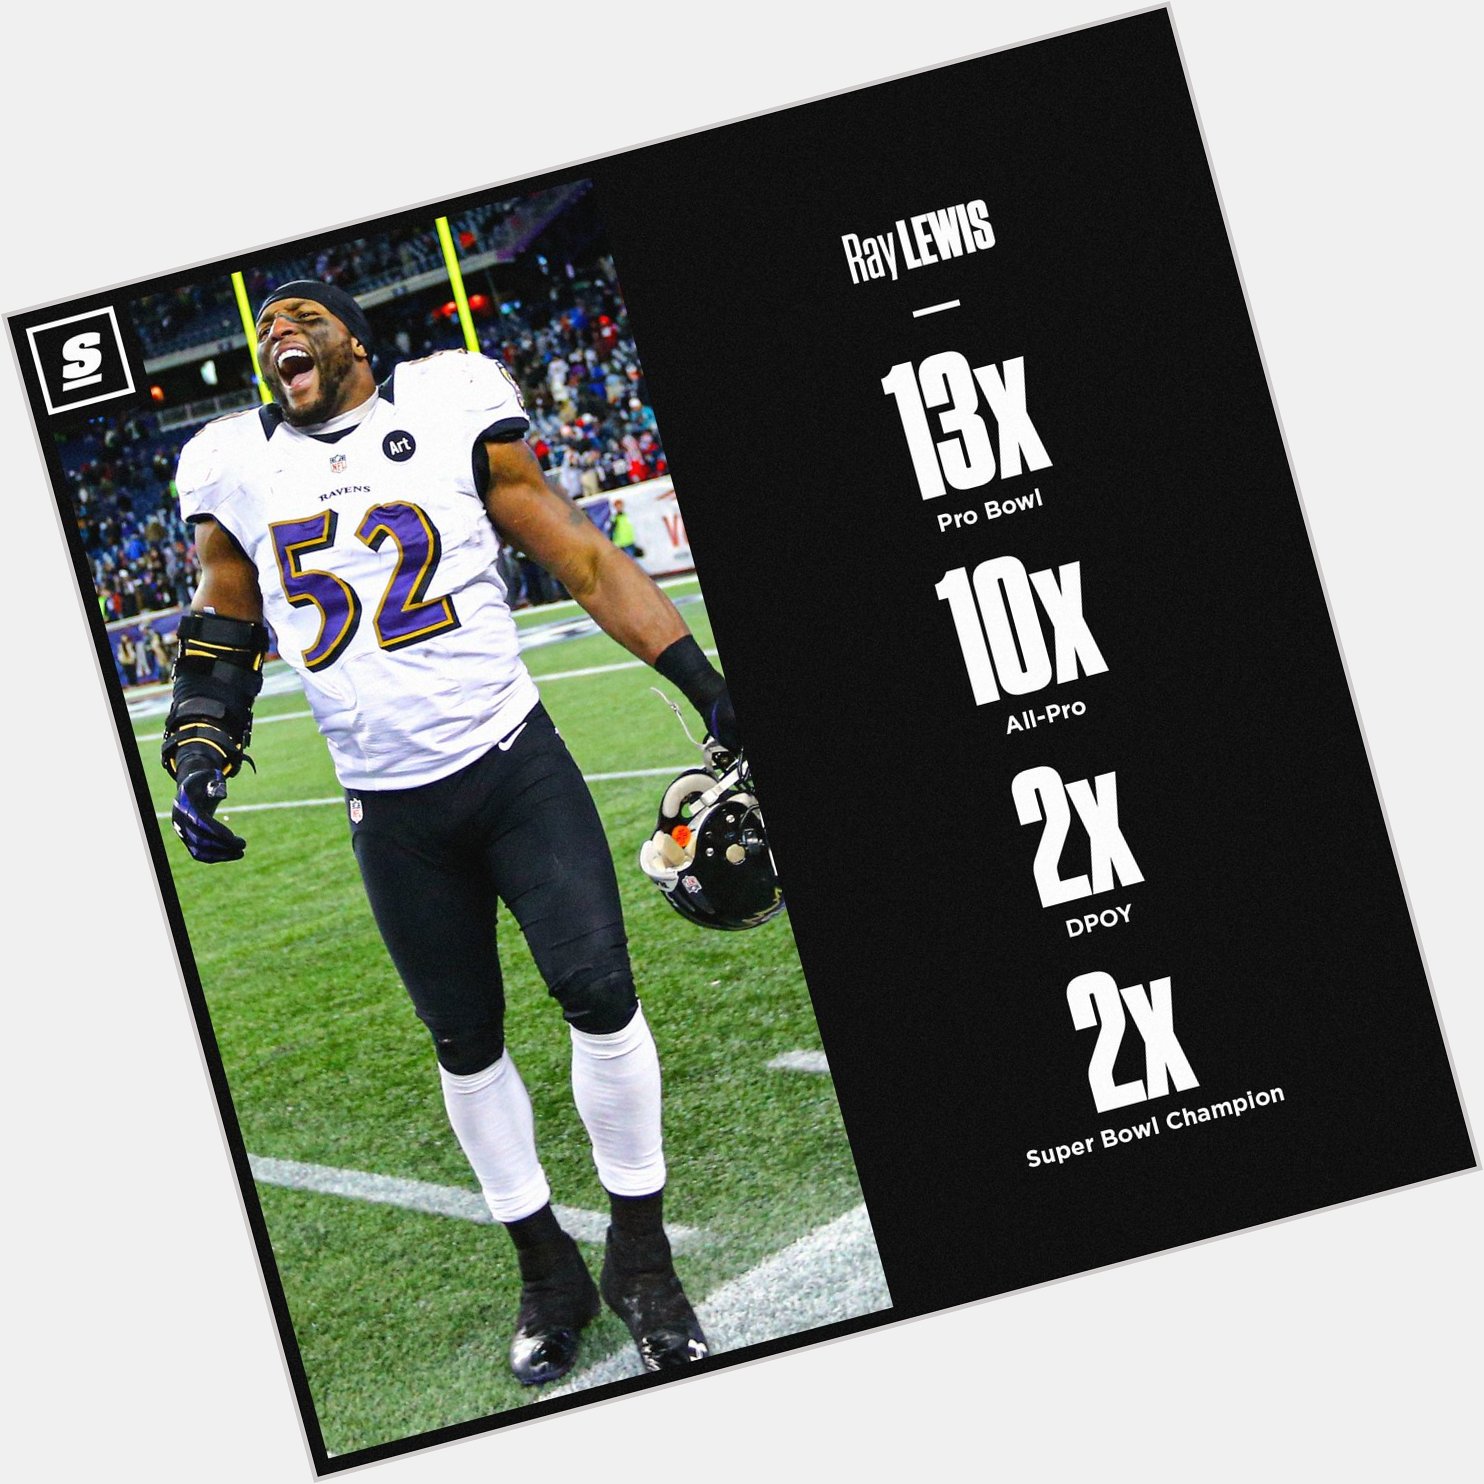 One of the best defensive players ever. 

Happy 48th birthday, Ray Lewis! 